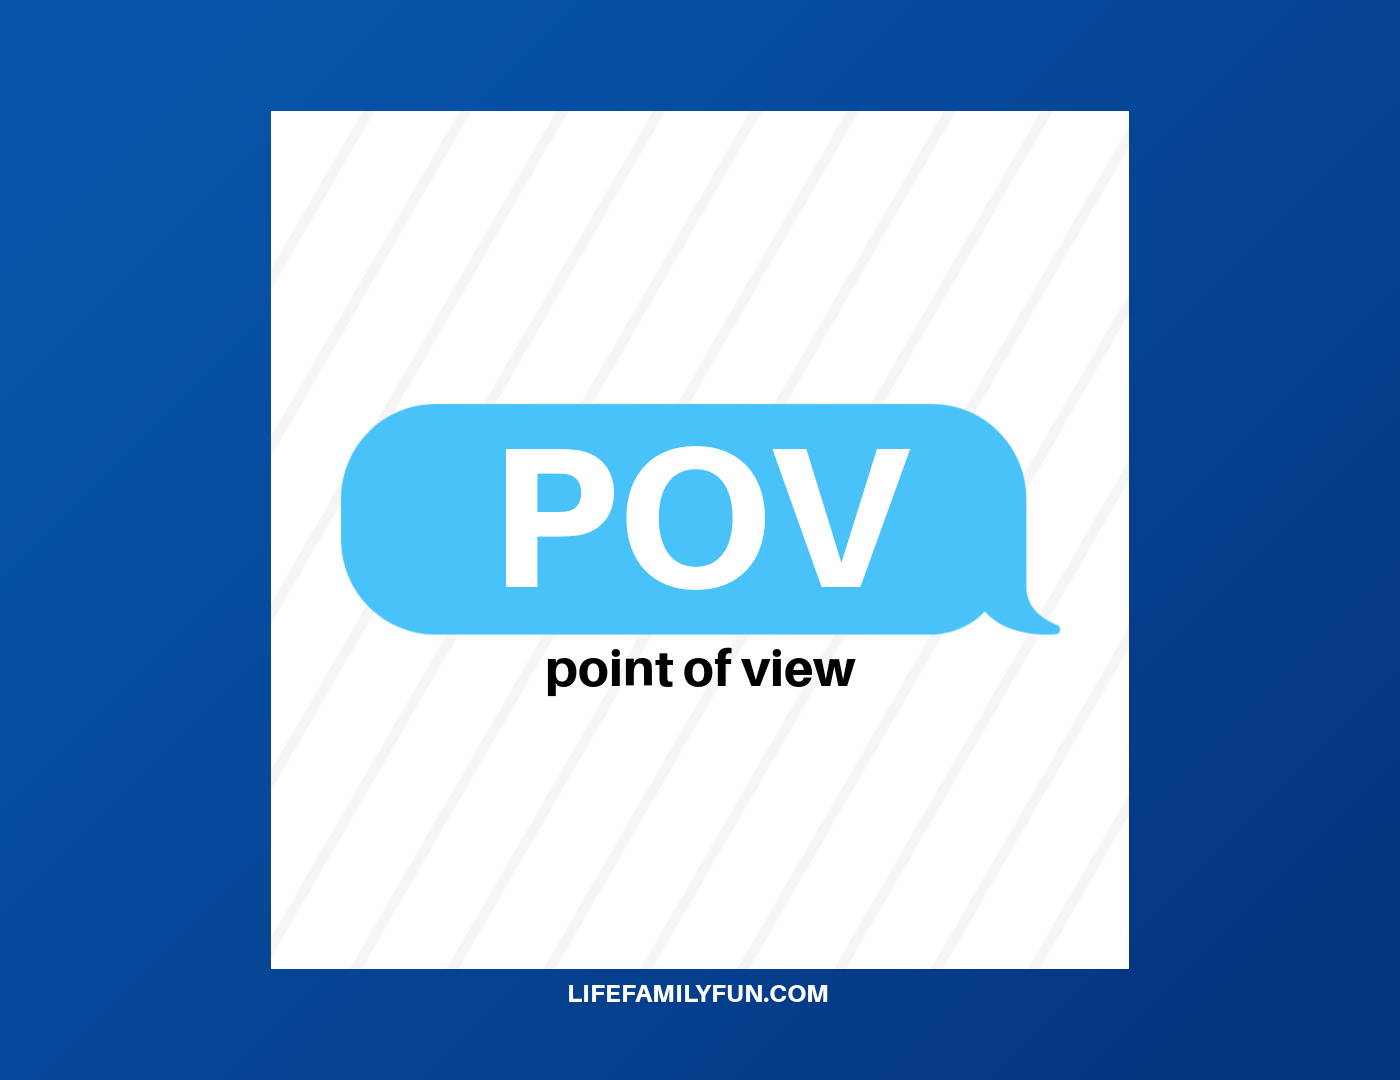 Pov meaning